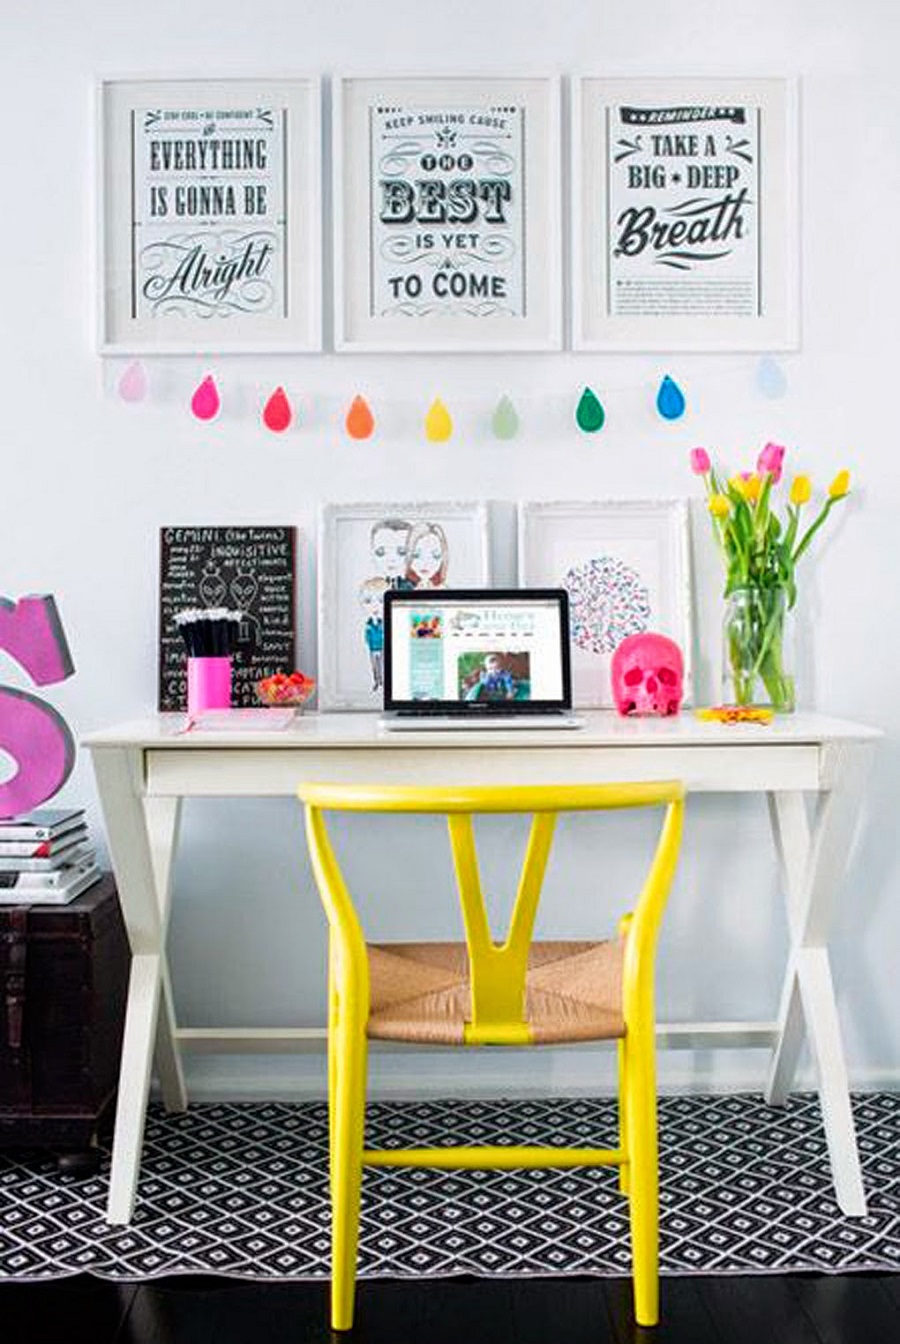 AD-Top-Lively-Rainbow-Decor-Ideas-That-Will-Cheer-You-Up-06